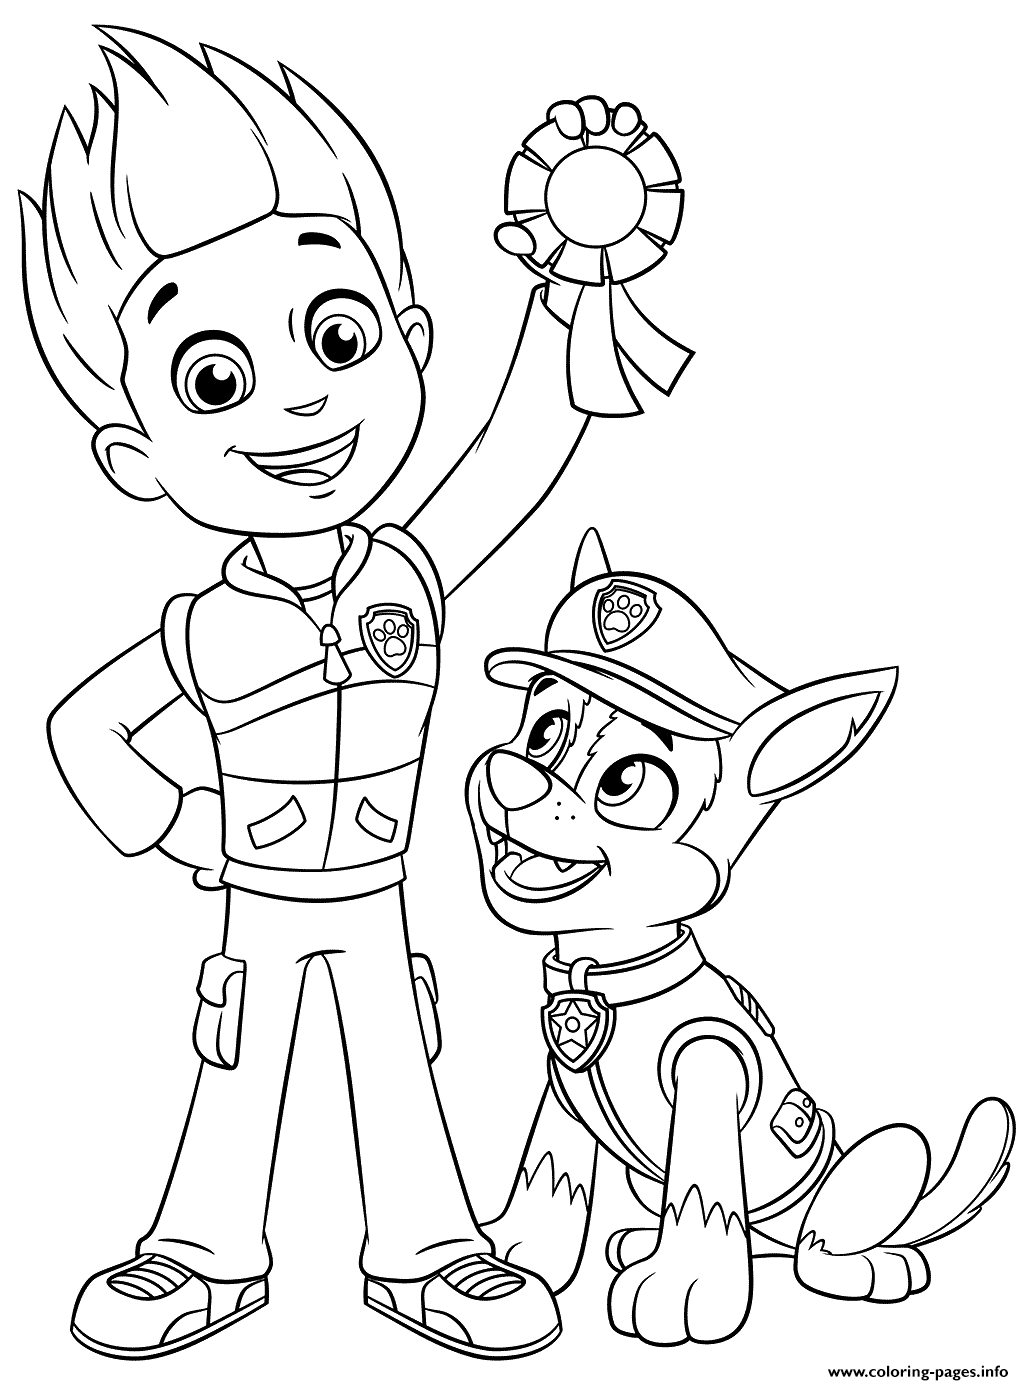 Download Paw Patrol Ryder And Chase Coloring Pages Printable